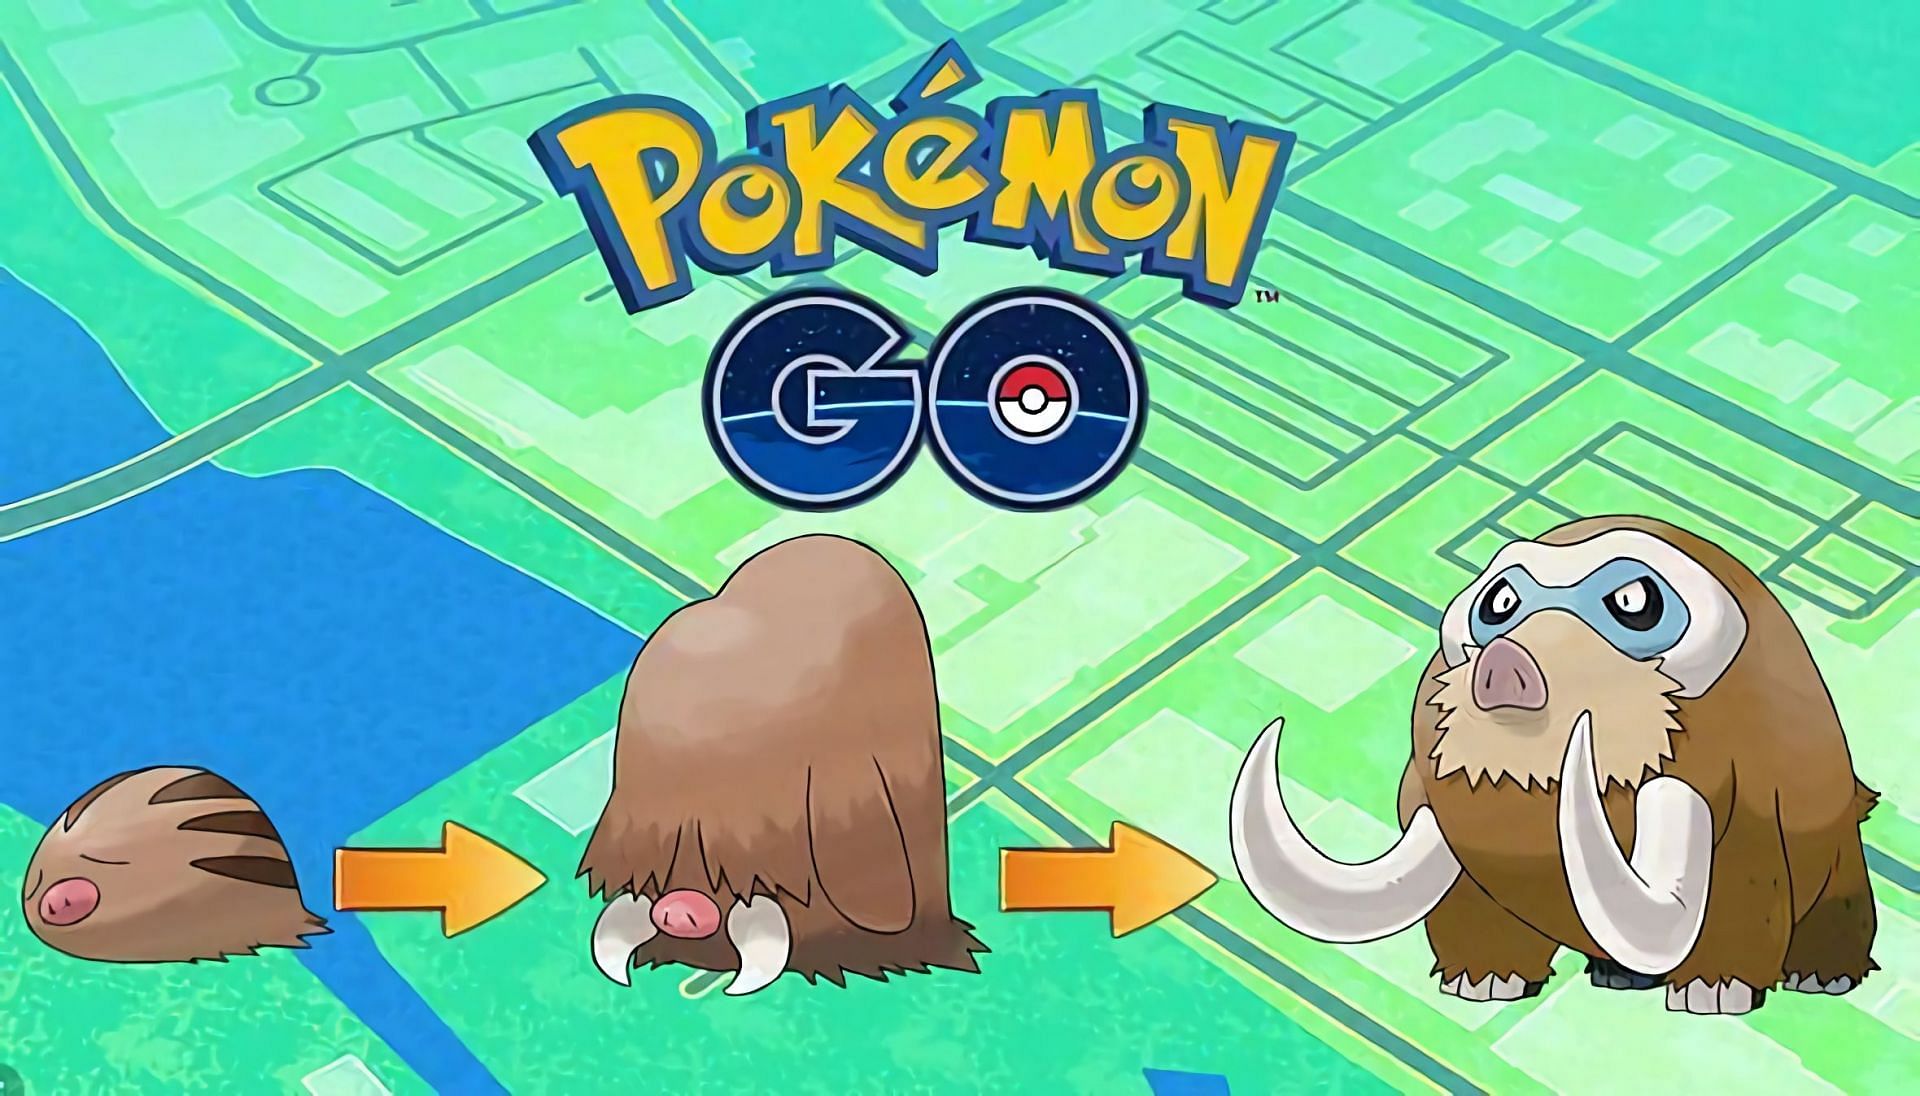 Piloswine and its evolutions as they appear in Pokemon GO (Image via Niantic)